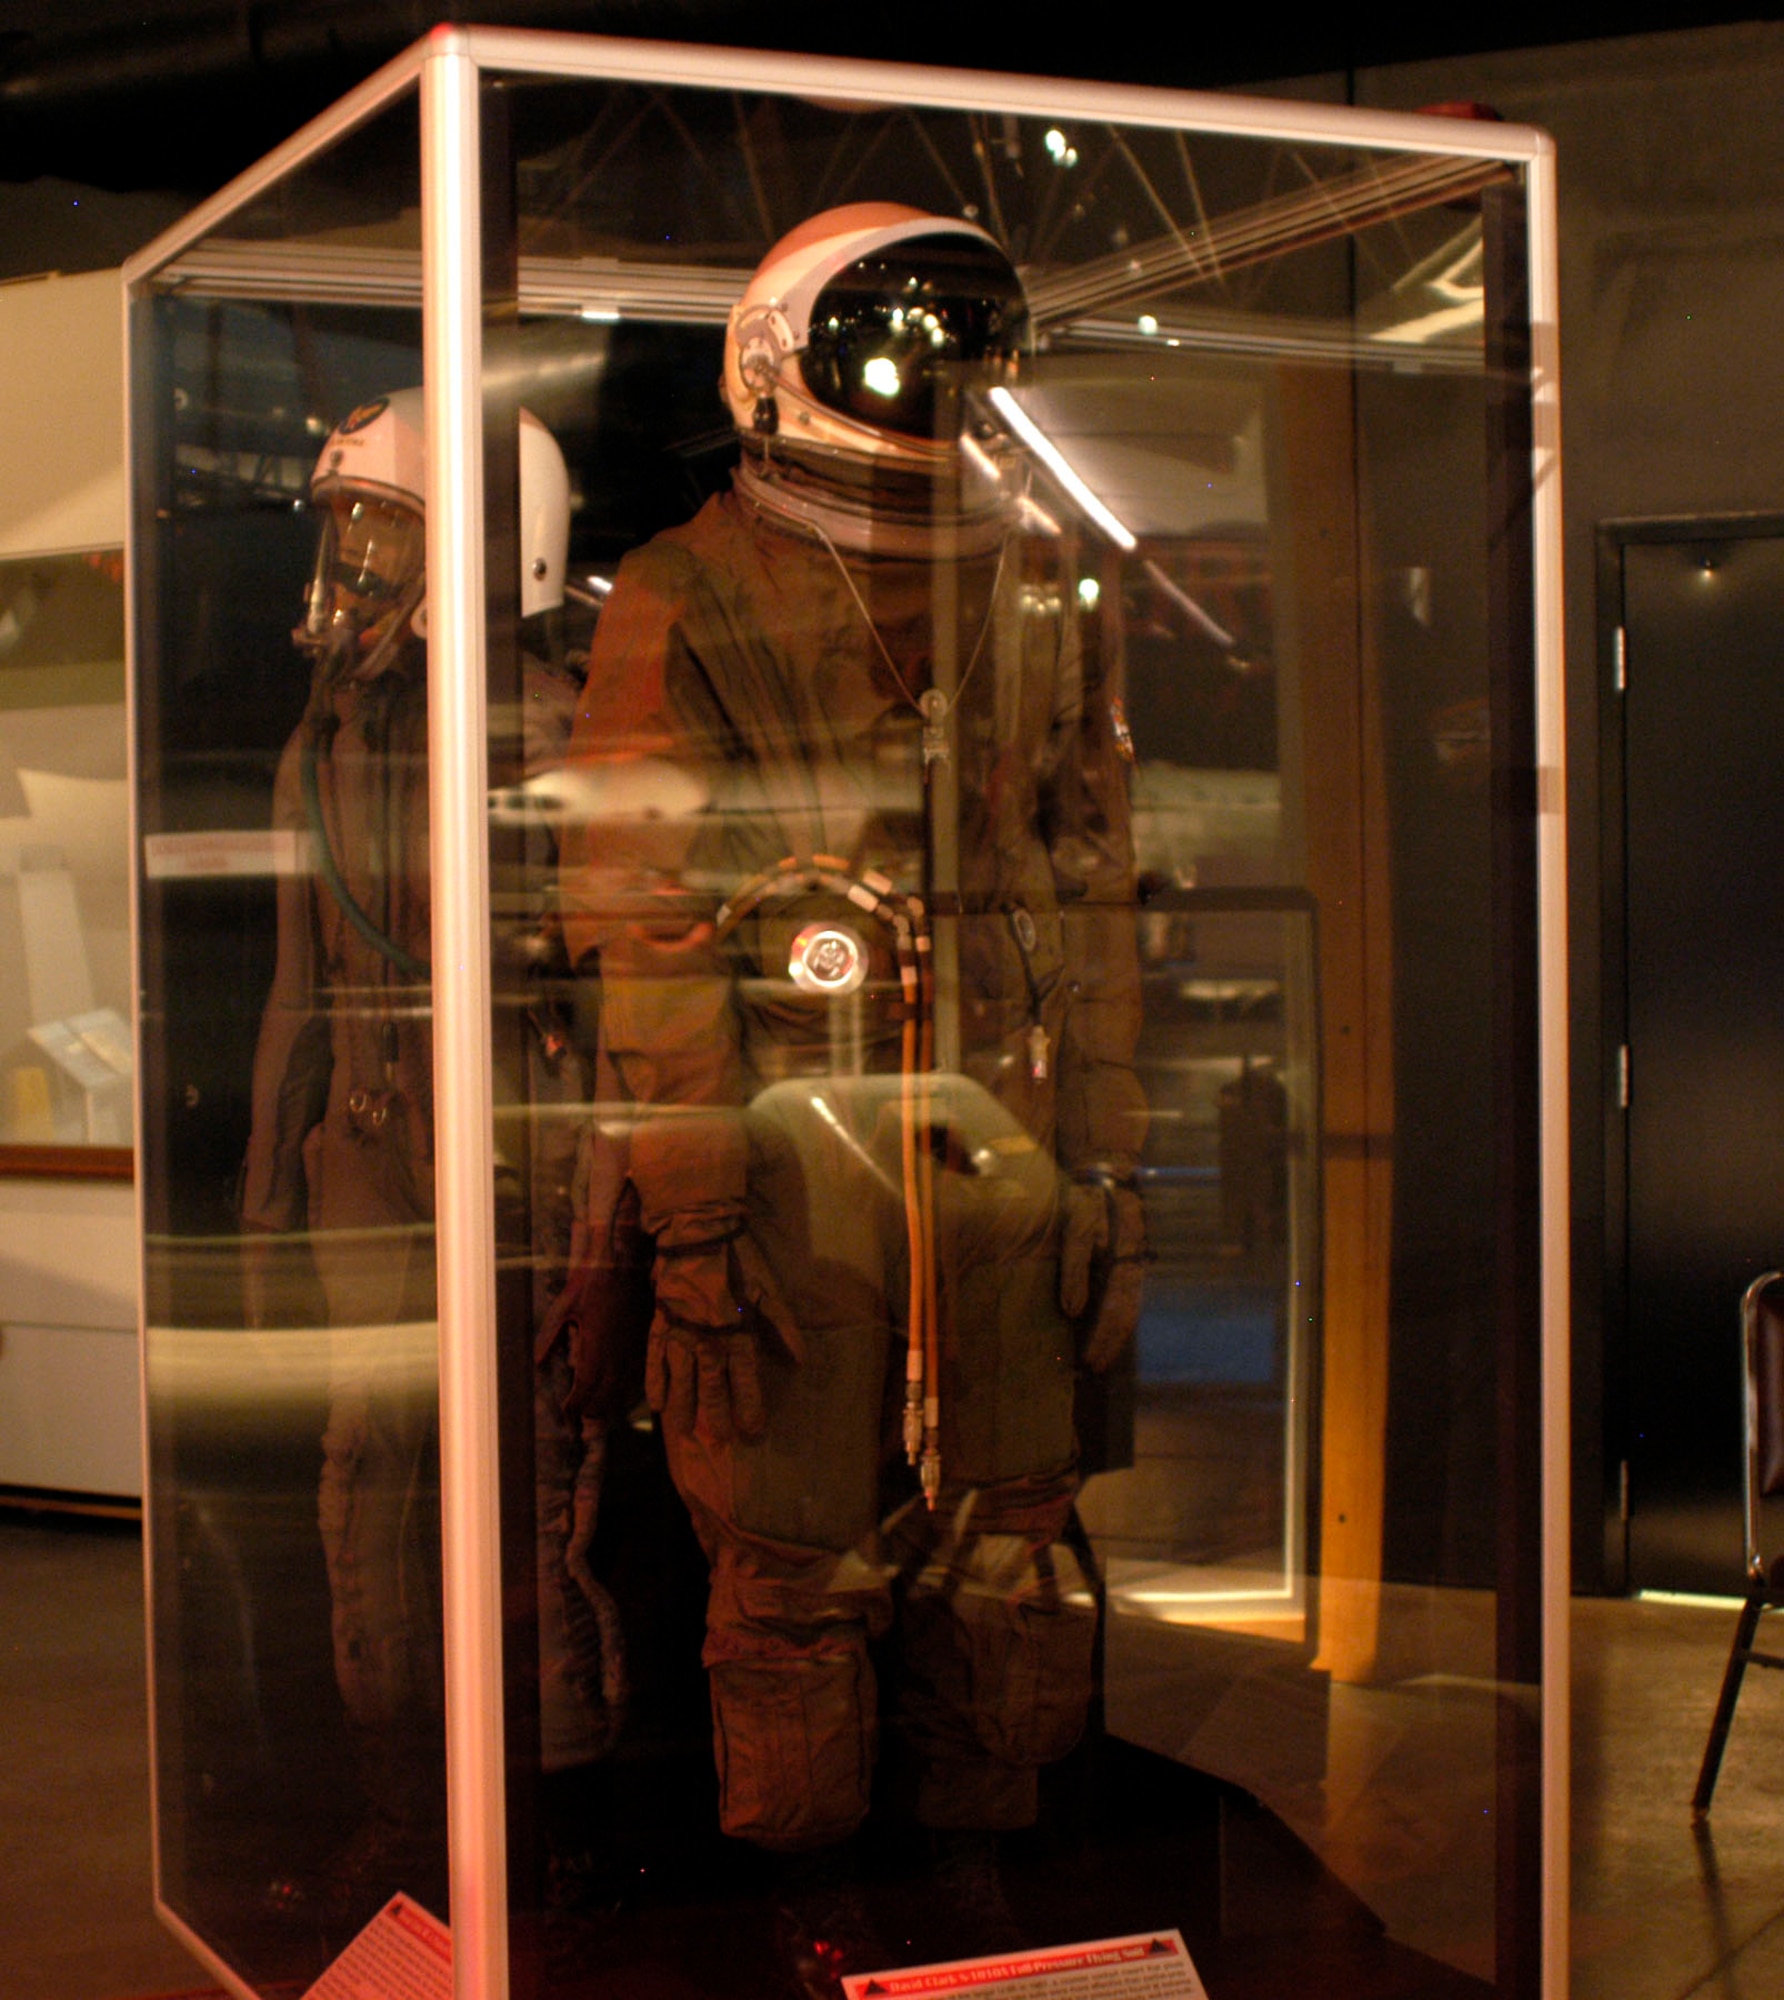 DAYTON, Ohio - David Clark S-1010A Full-Pressure Flying Suit on display in the Cold War Gallery of the National Museum of the U.S. Air Force. (U.S. Air Force photo)